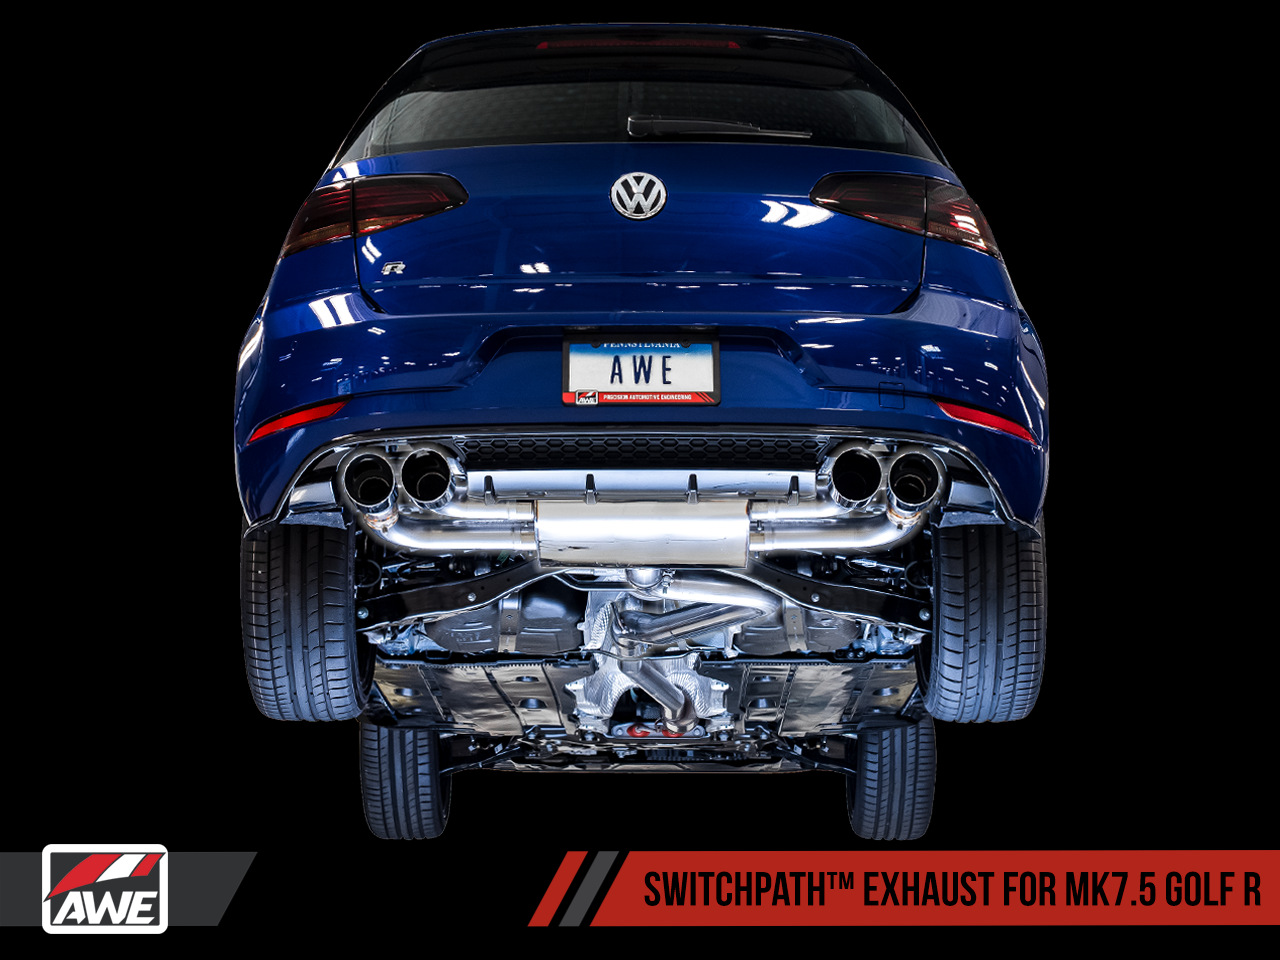 AWE Performance Exhaust Suite for Volkswagen Mk7.5 Golf R